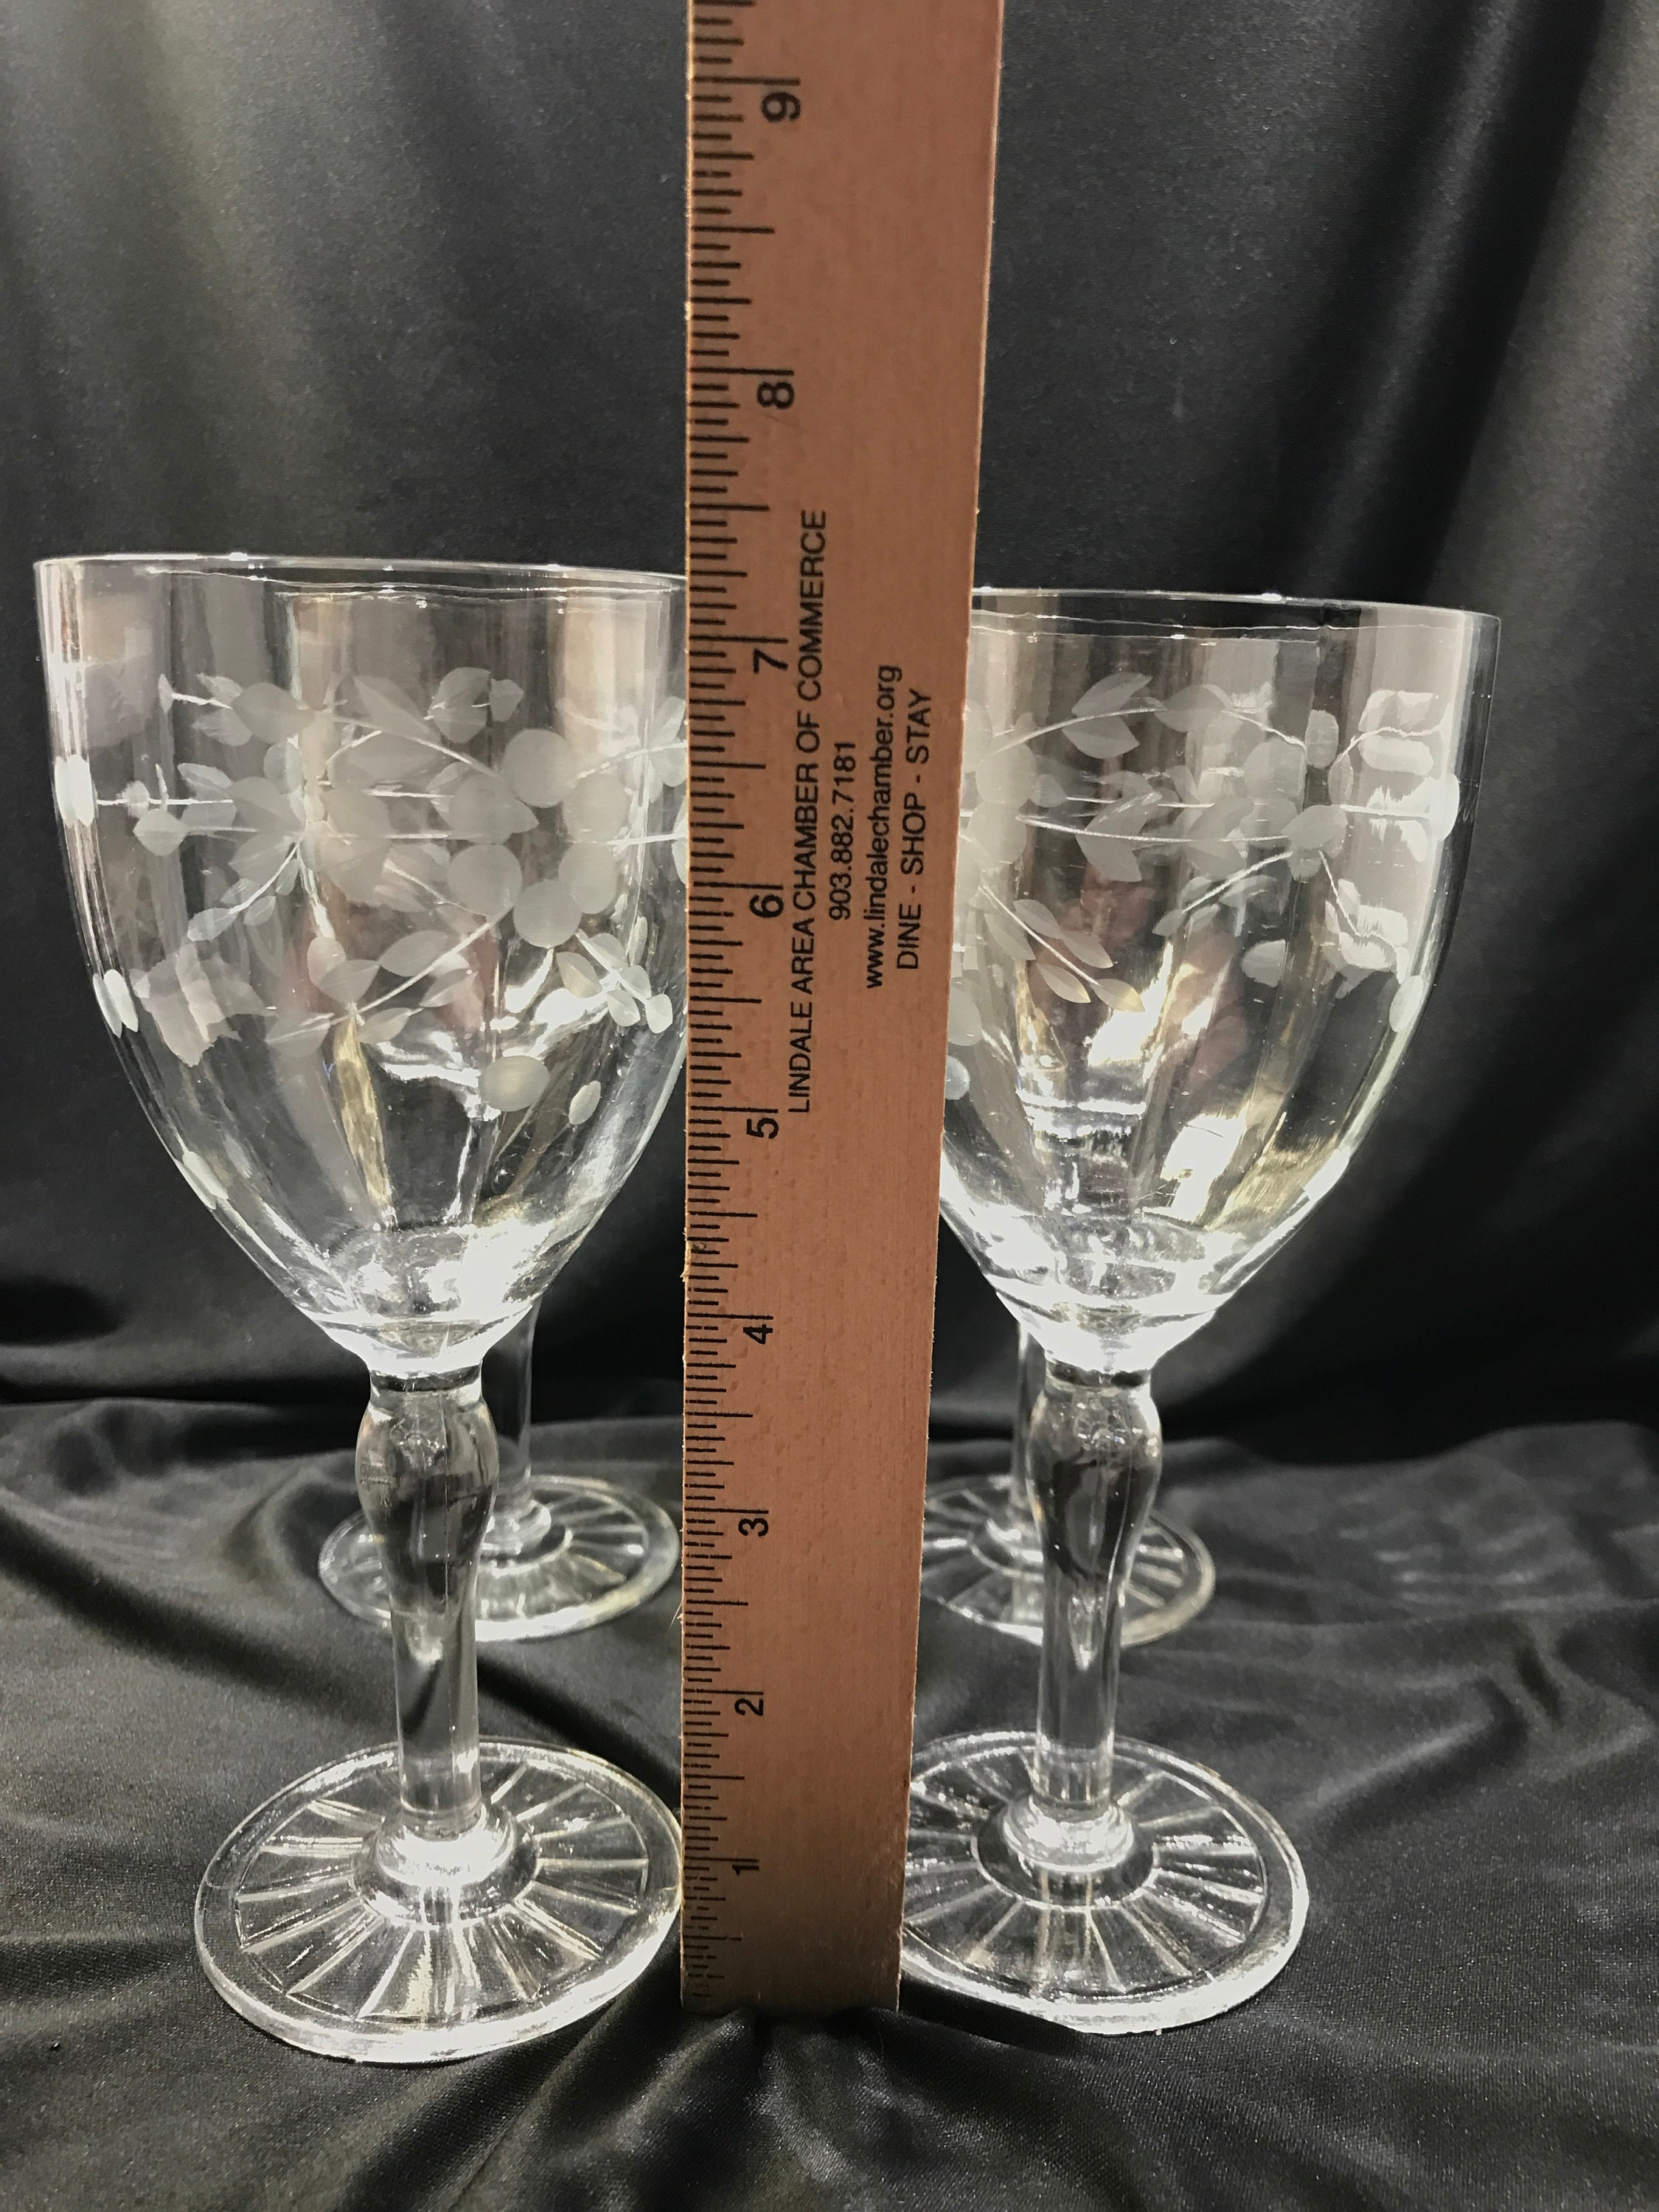 Wine Glass Set, Etched Cut Stemware Lot, Set of 4 Glasses, Etched Clear  Floral Design, Housewarming Gift, Wedding Gift 